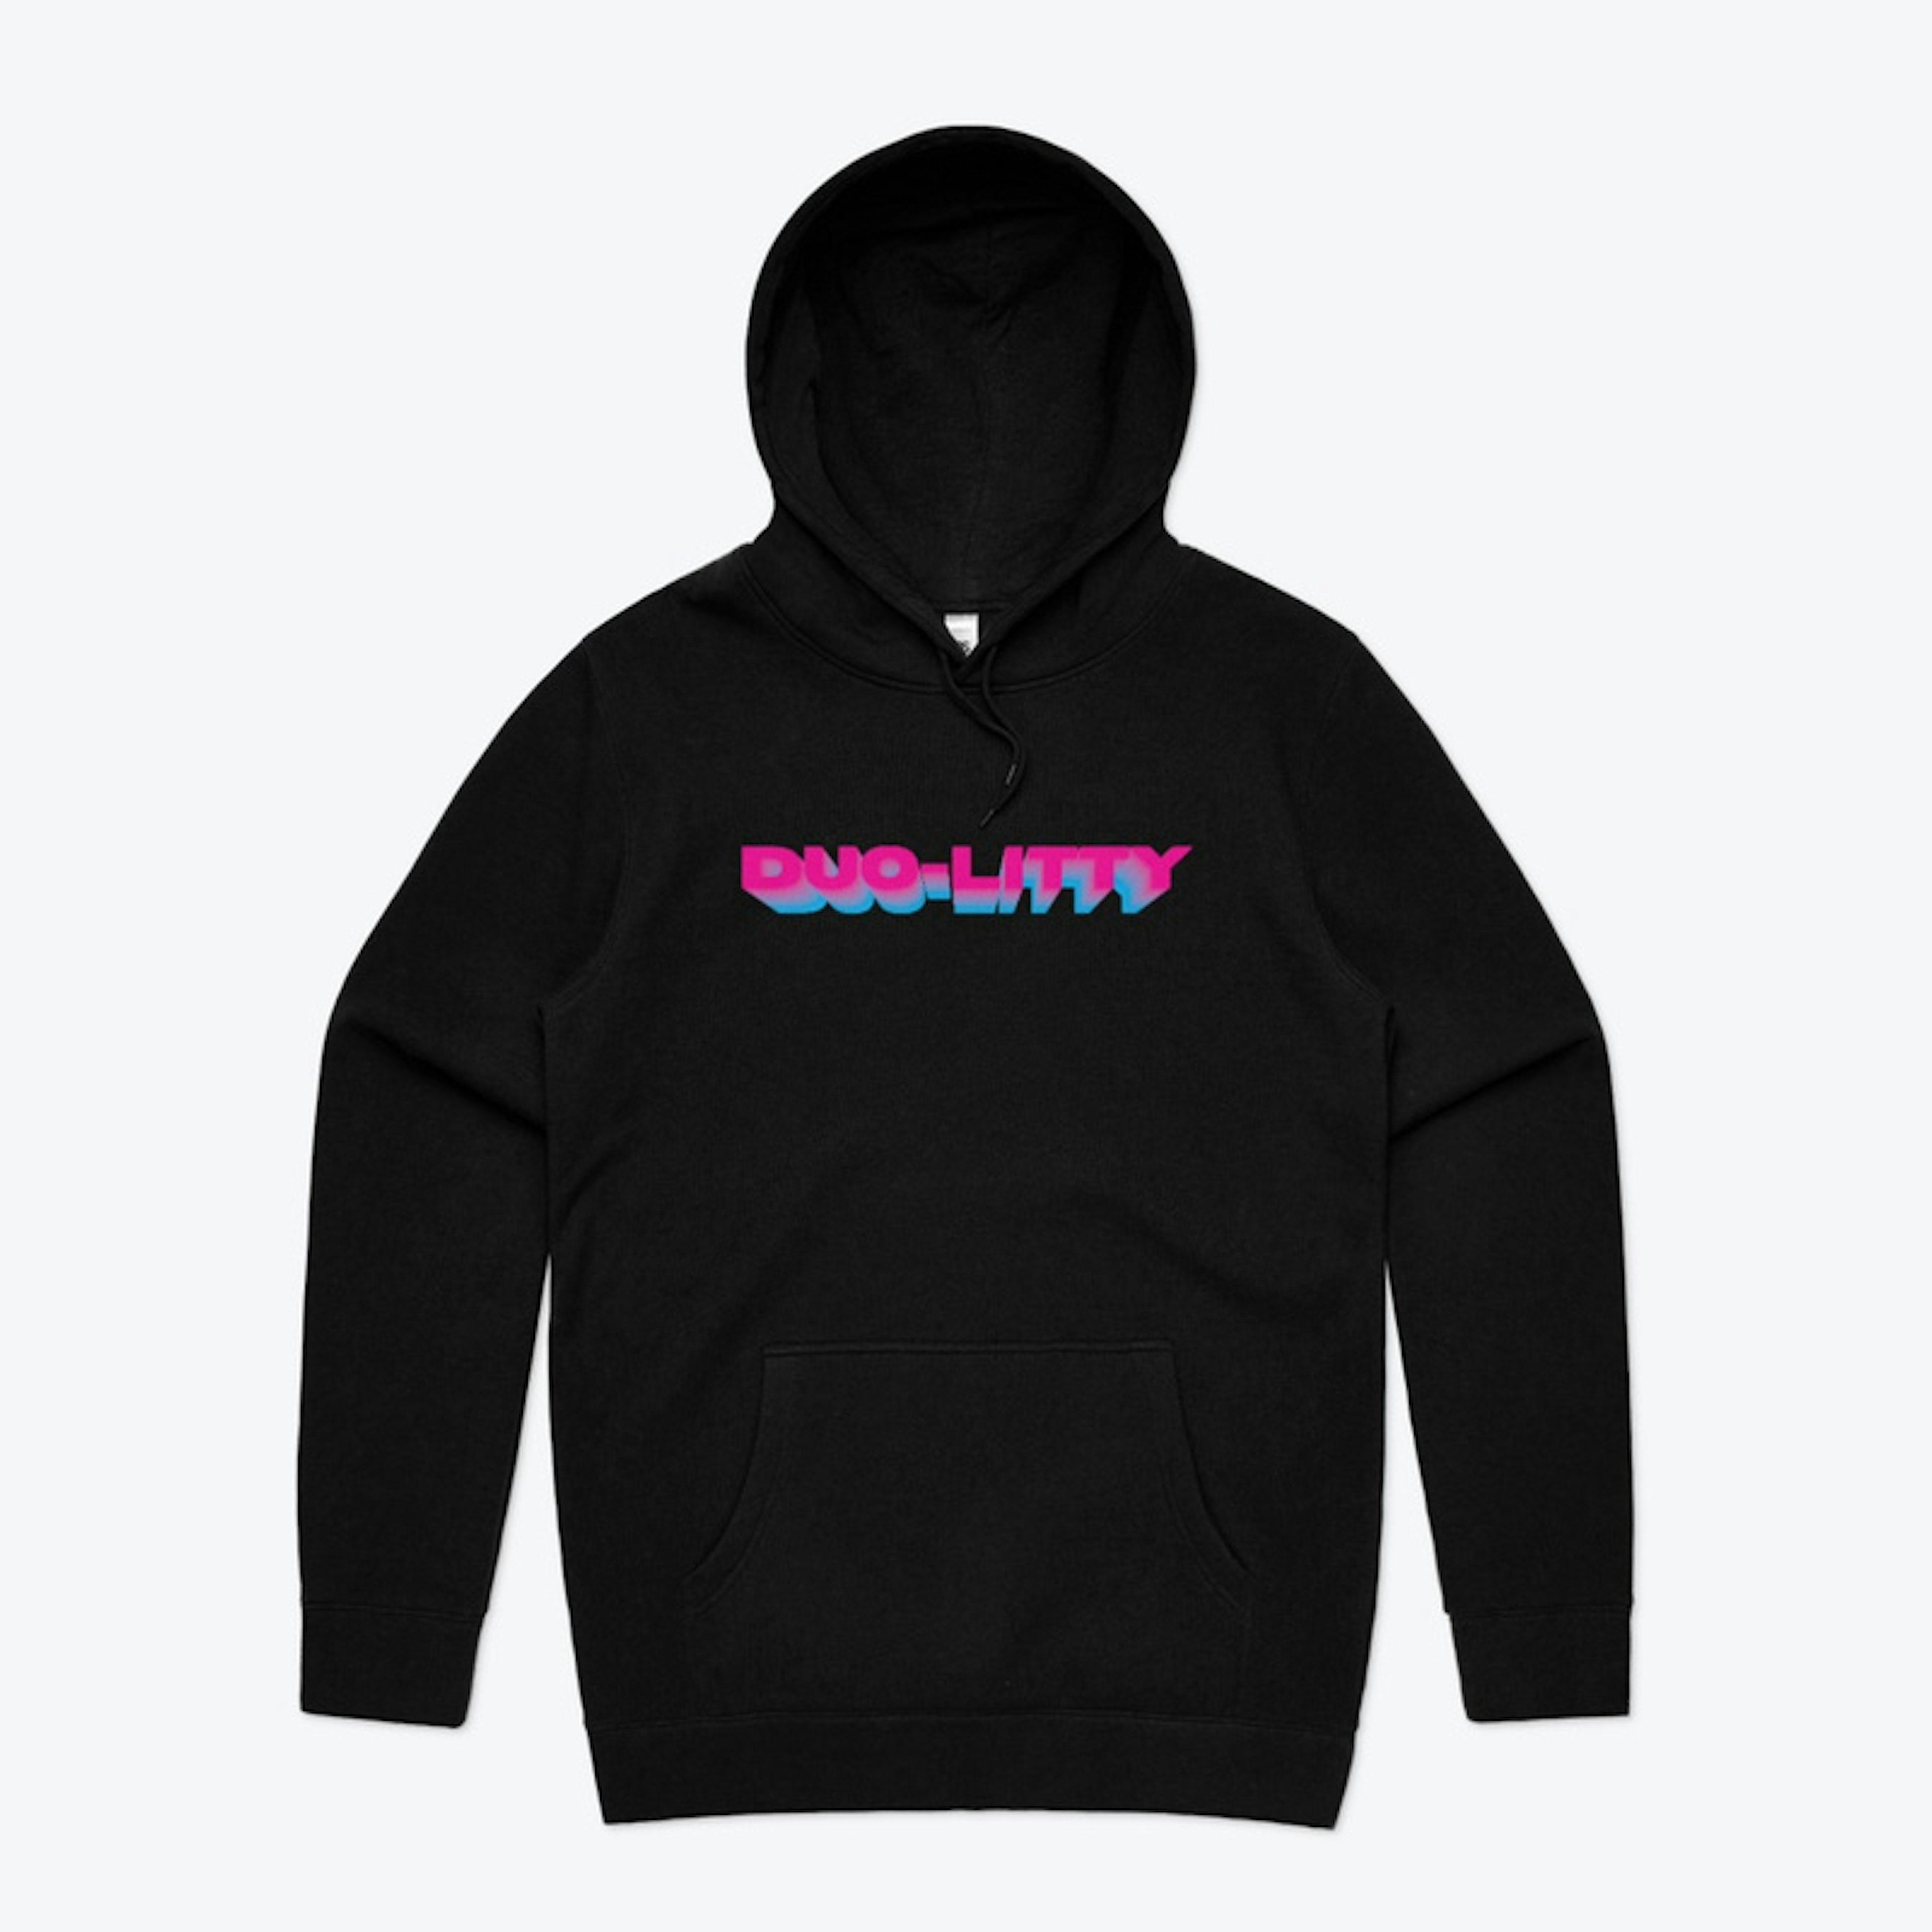 Duo-Litty Clothing